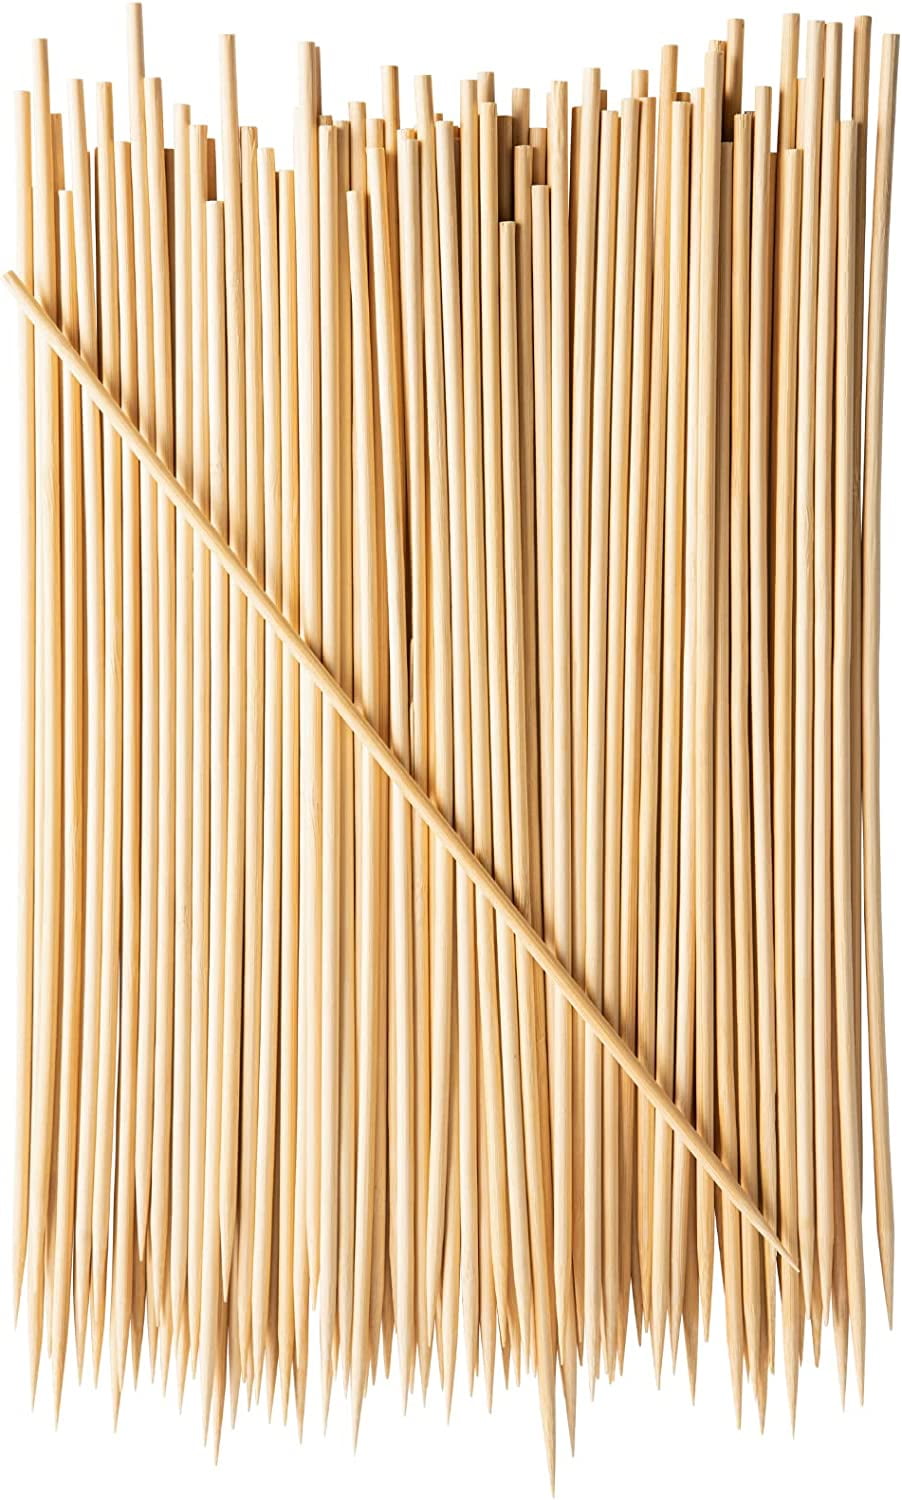 Andyrex Wood Skewers 12 inch,Natural Bamboo Skewers for BBQ,Corn